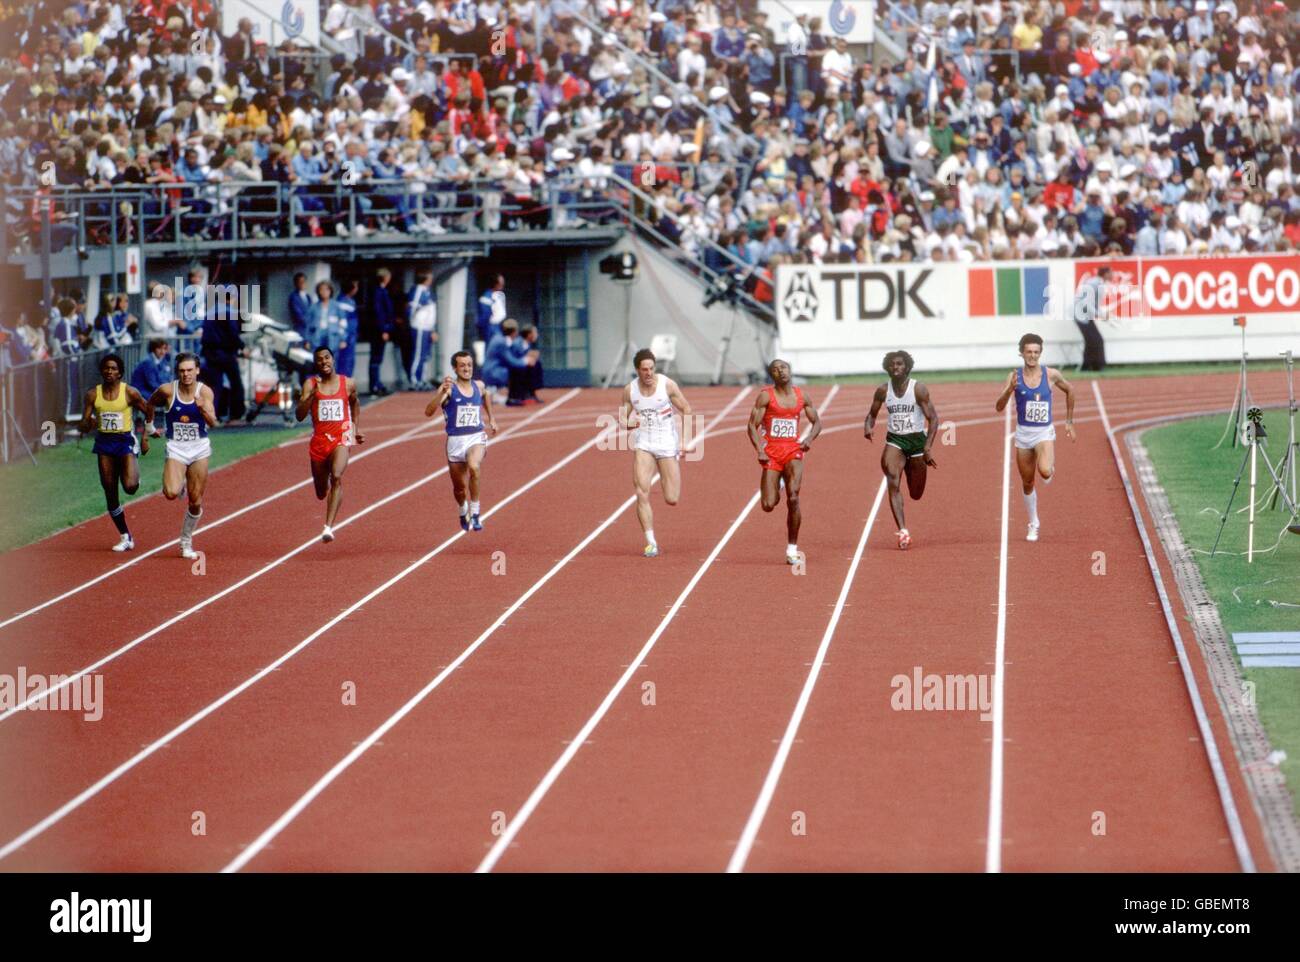 USA's Calvin Smith (third r) leads from teammate Elliott Quow (third l), Italy's Pietro Mennea (fourth l), Great Britain's Alan Wells (fourth r), East Germany's Frank Emmelmann (second l), Nigeria's Innocent Egbunike (second r), Italy's Carlo Simionato (r) and Brazil's Joao Batista Da Silva (l) Stock Photo